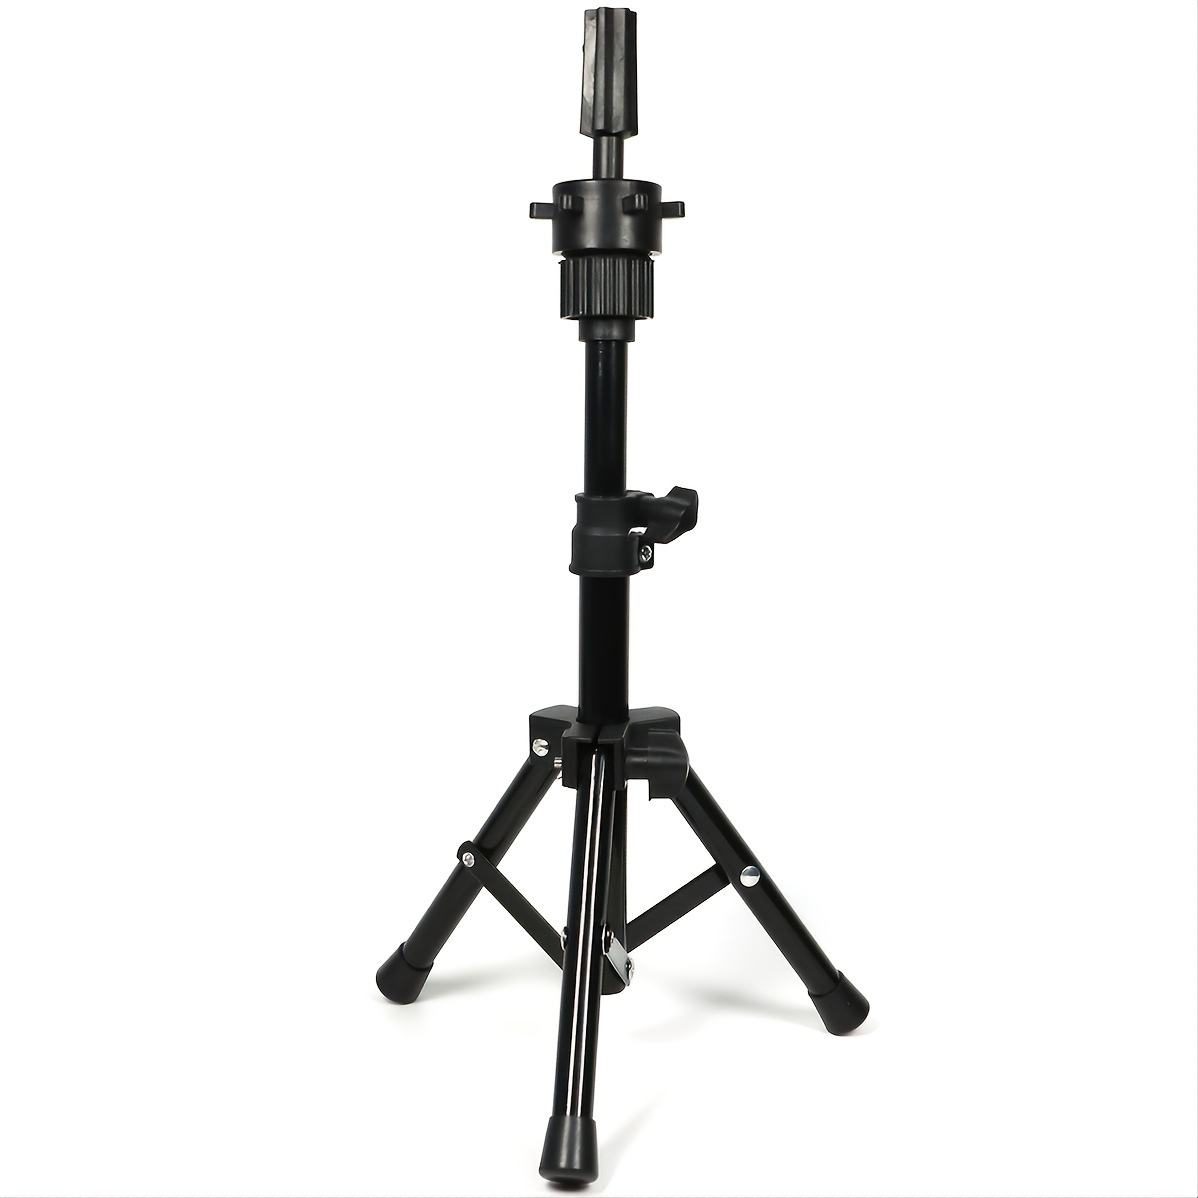 

Adjustable Tripod Stand For Hairdressing Training And Practice - Securely Holds Wigs And Models For Perfect Styles